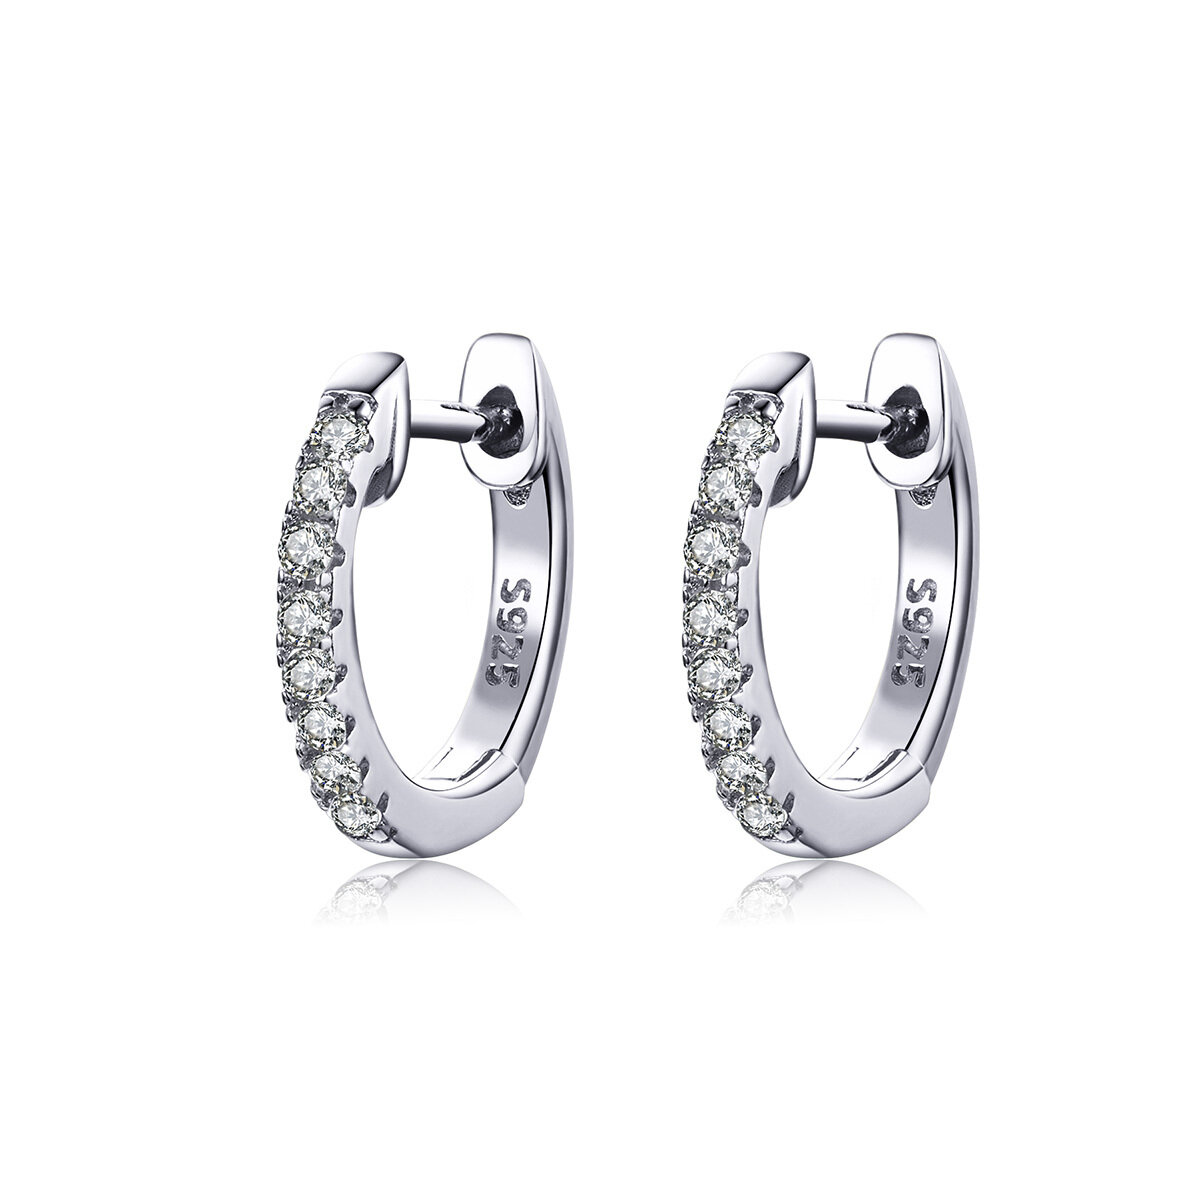 GemKing Small circle S925 Sterling Silver Earrings